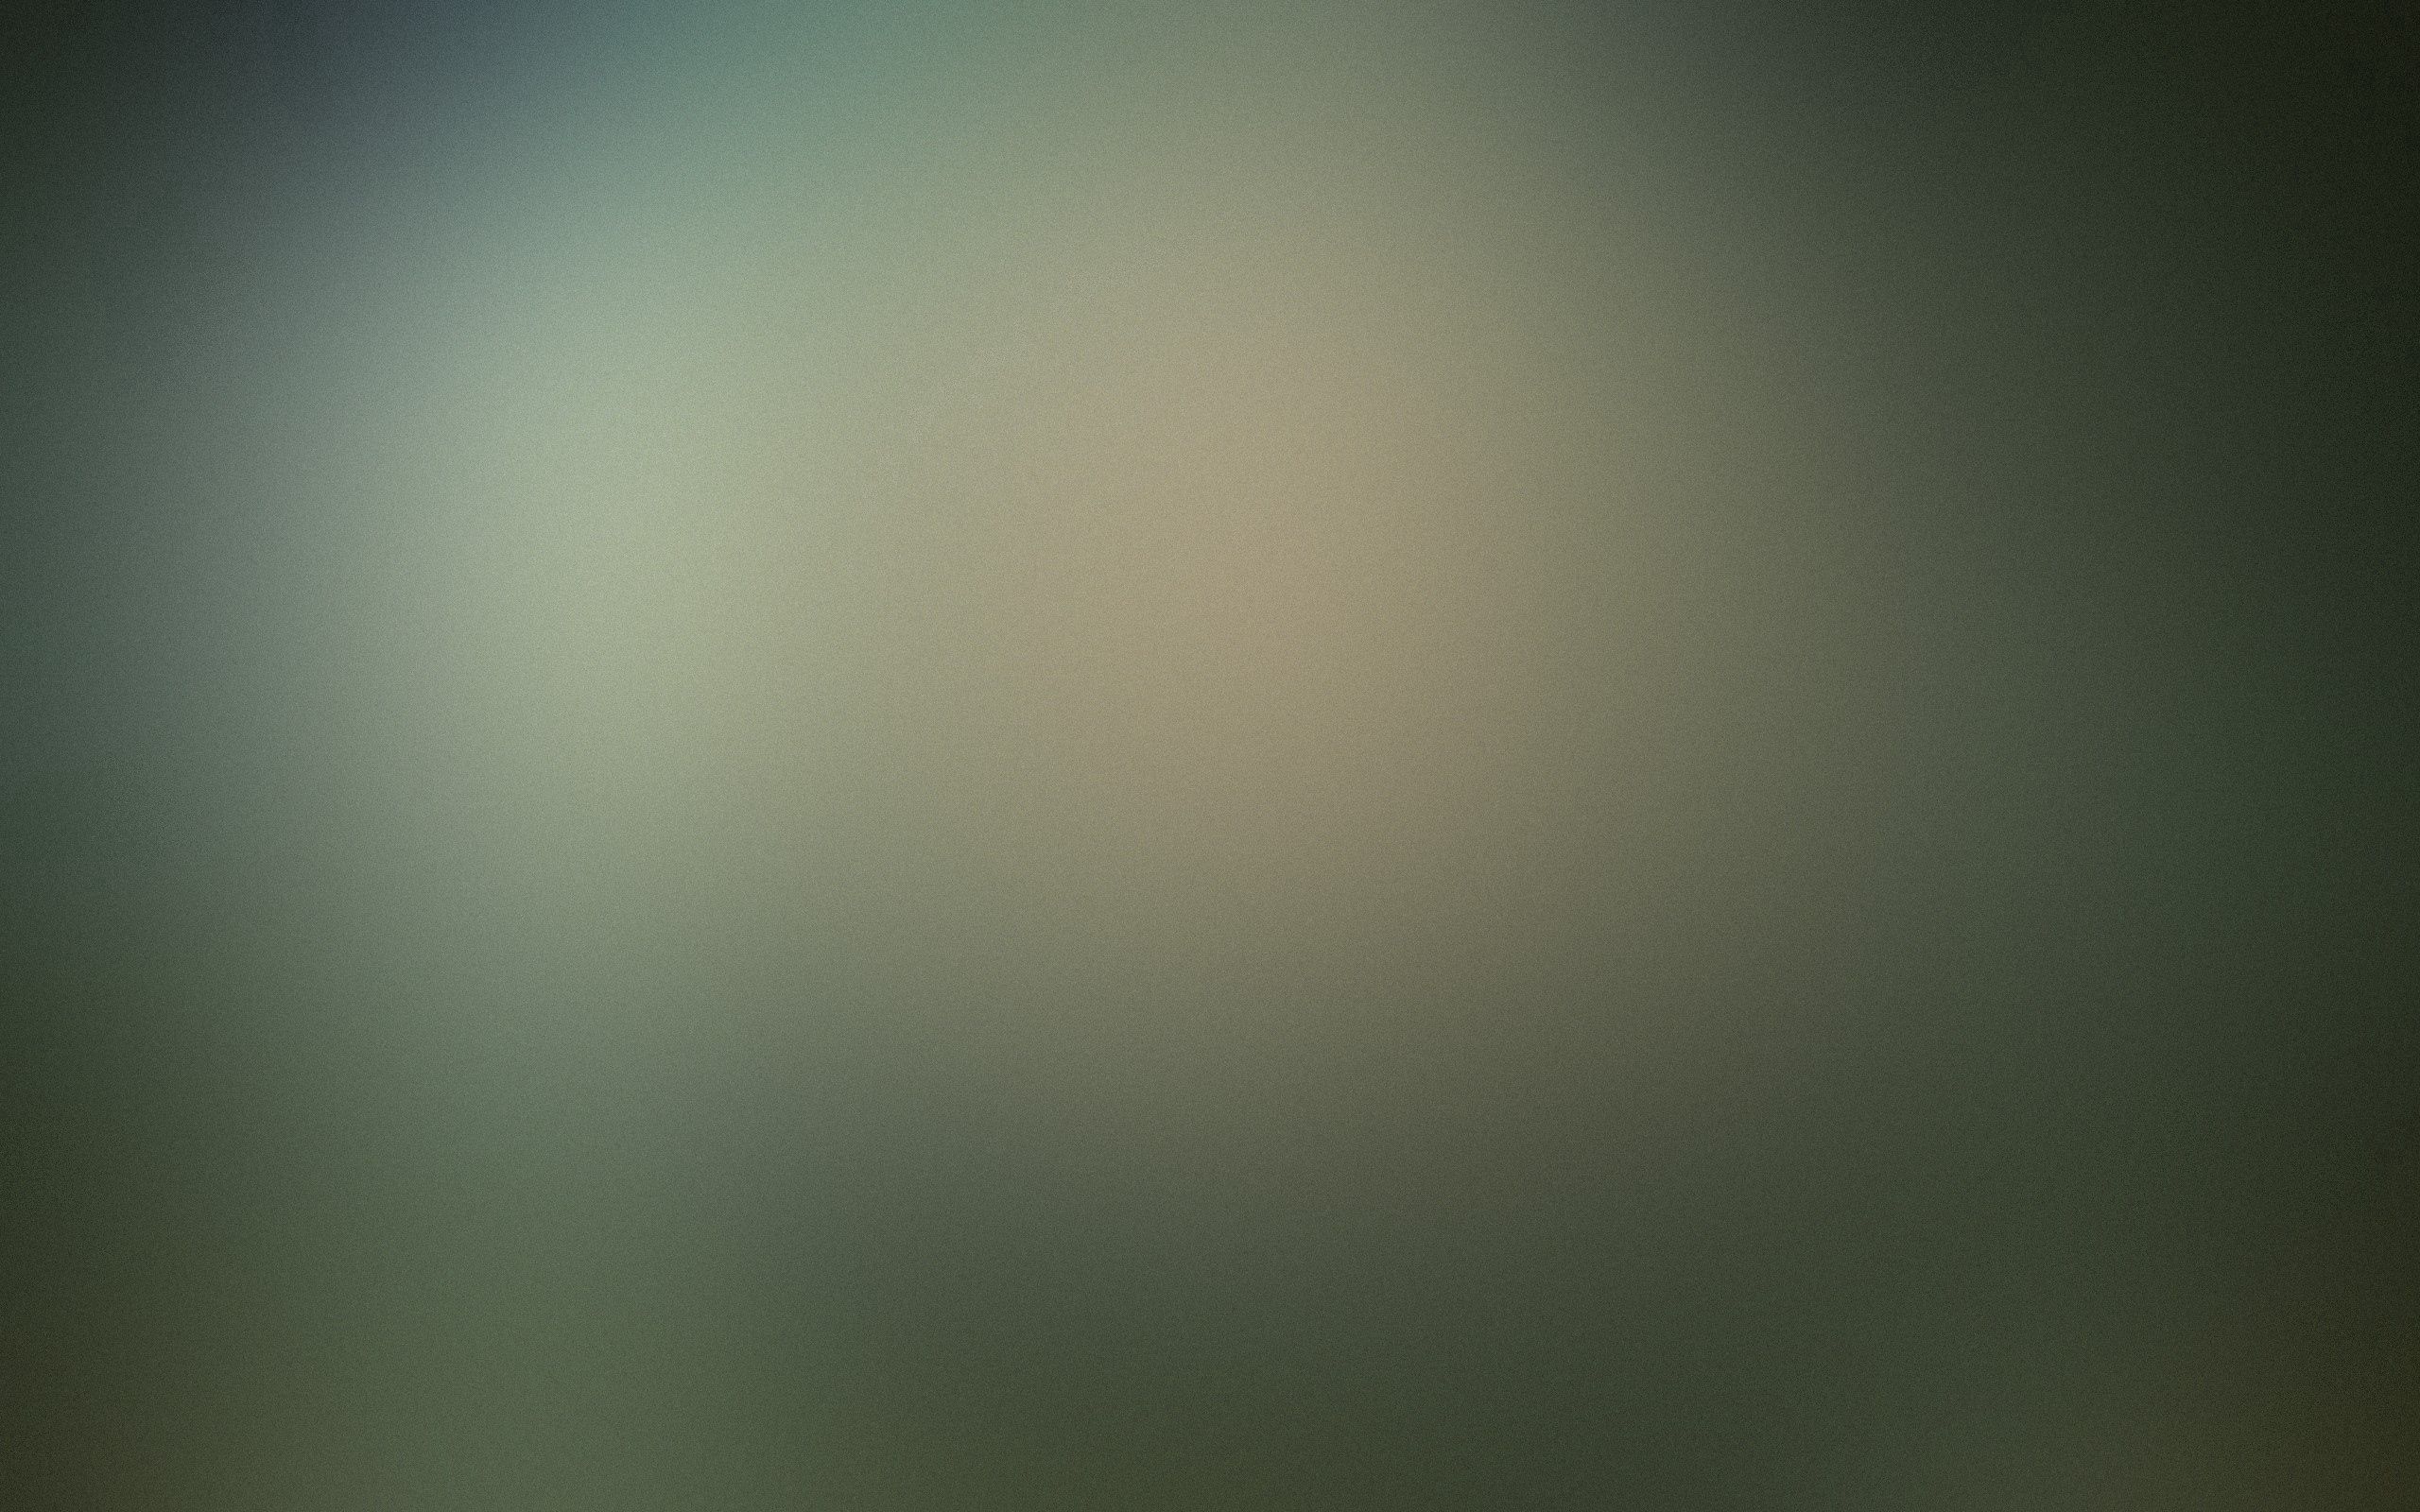 solid, shades, shine, light, texture, textures, stains, spots 1080p